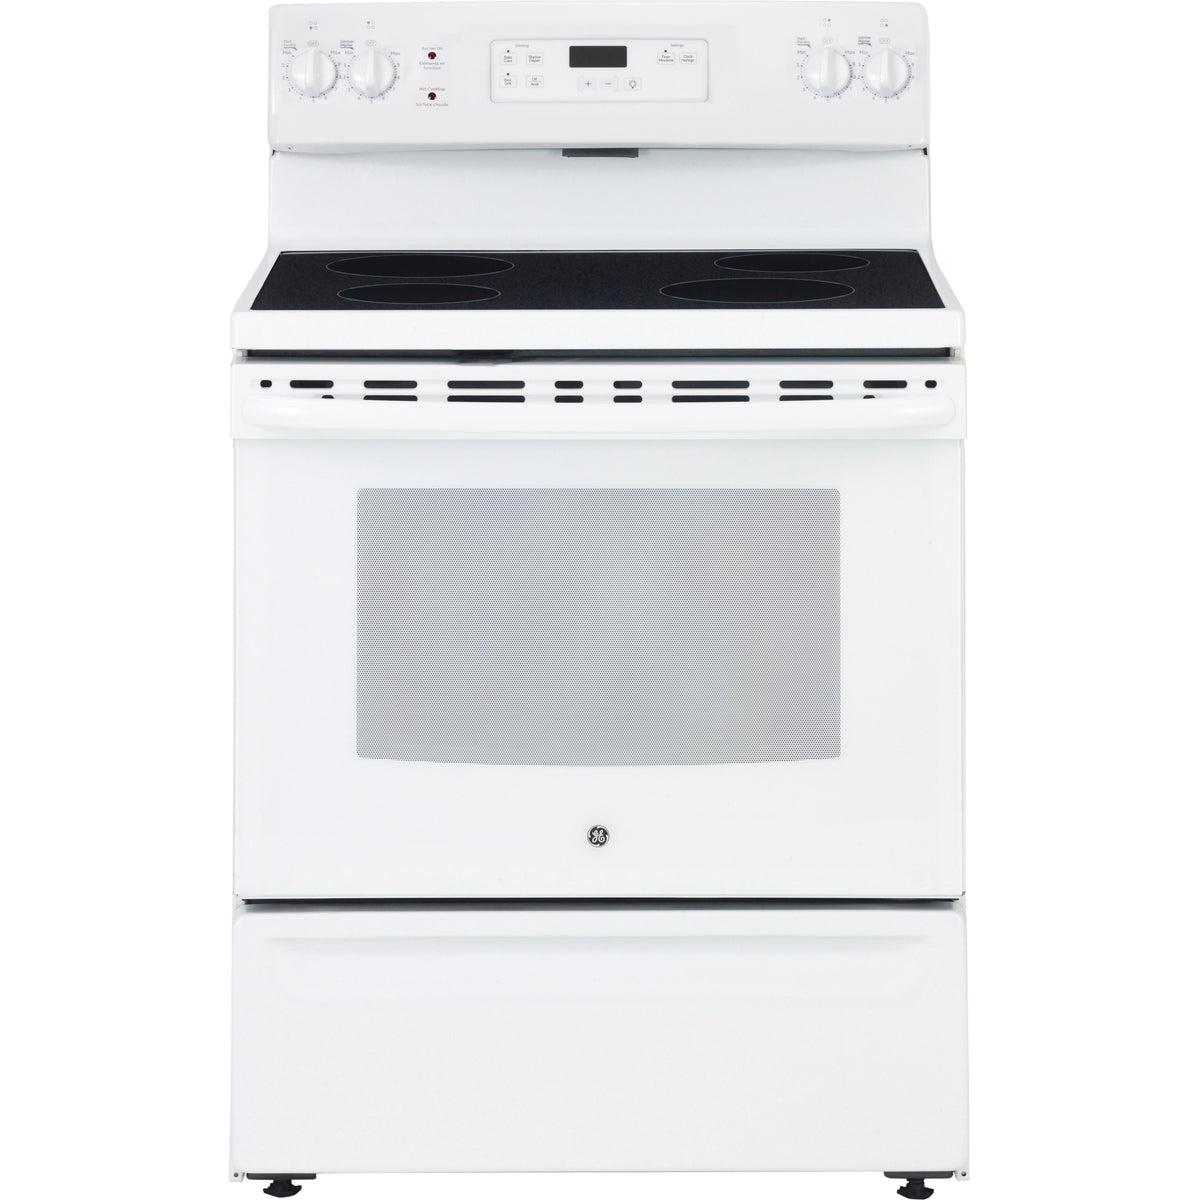 GE 30-inch Freestanding Electric Range with Smooth Top JCBS630DKWW IMAGE 1